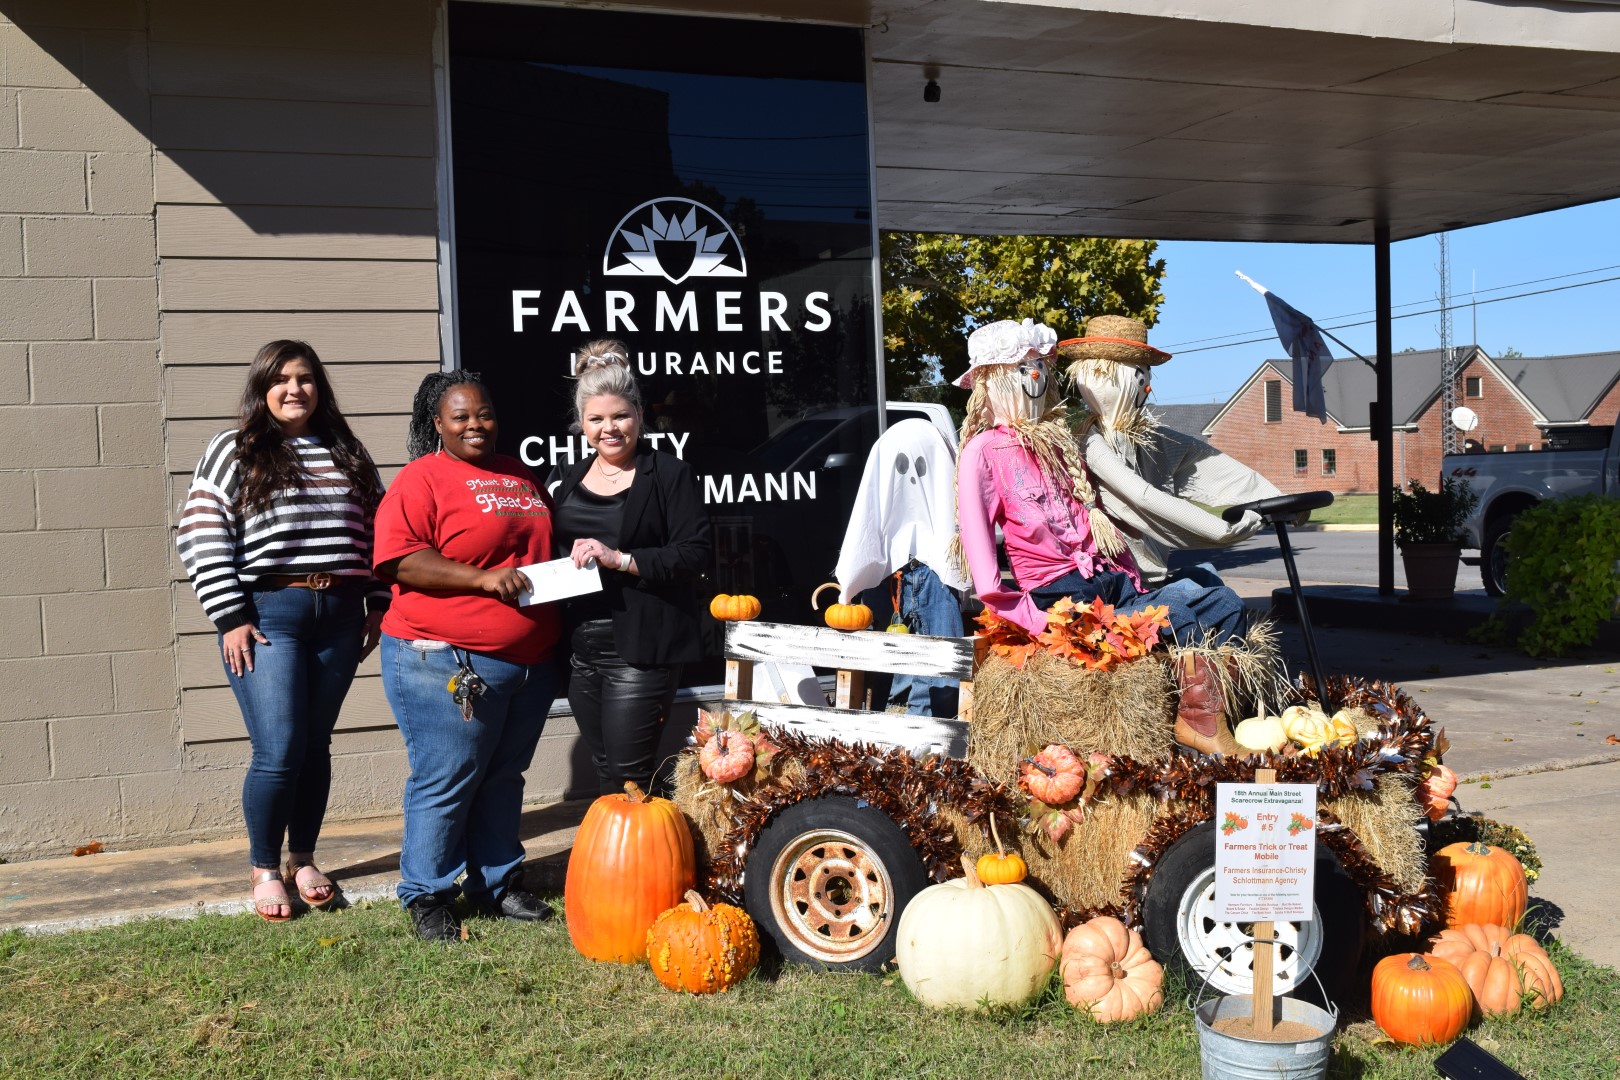 Three women in front of farmers insurance standing next to a truck made out of hay with two scarecrows sitting in the front and one in the bed of the "truck" in a ghost costume.